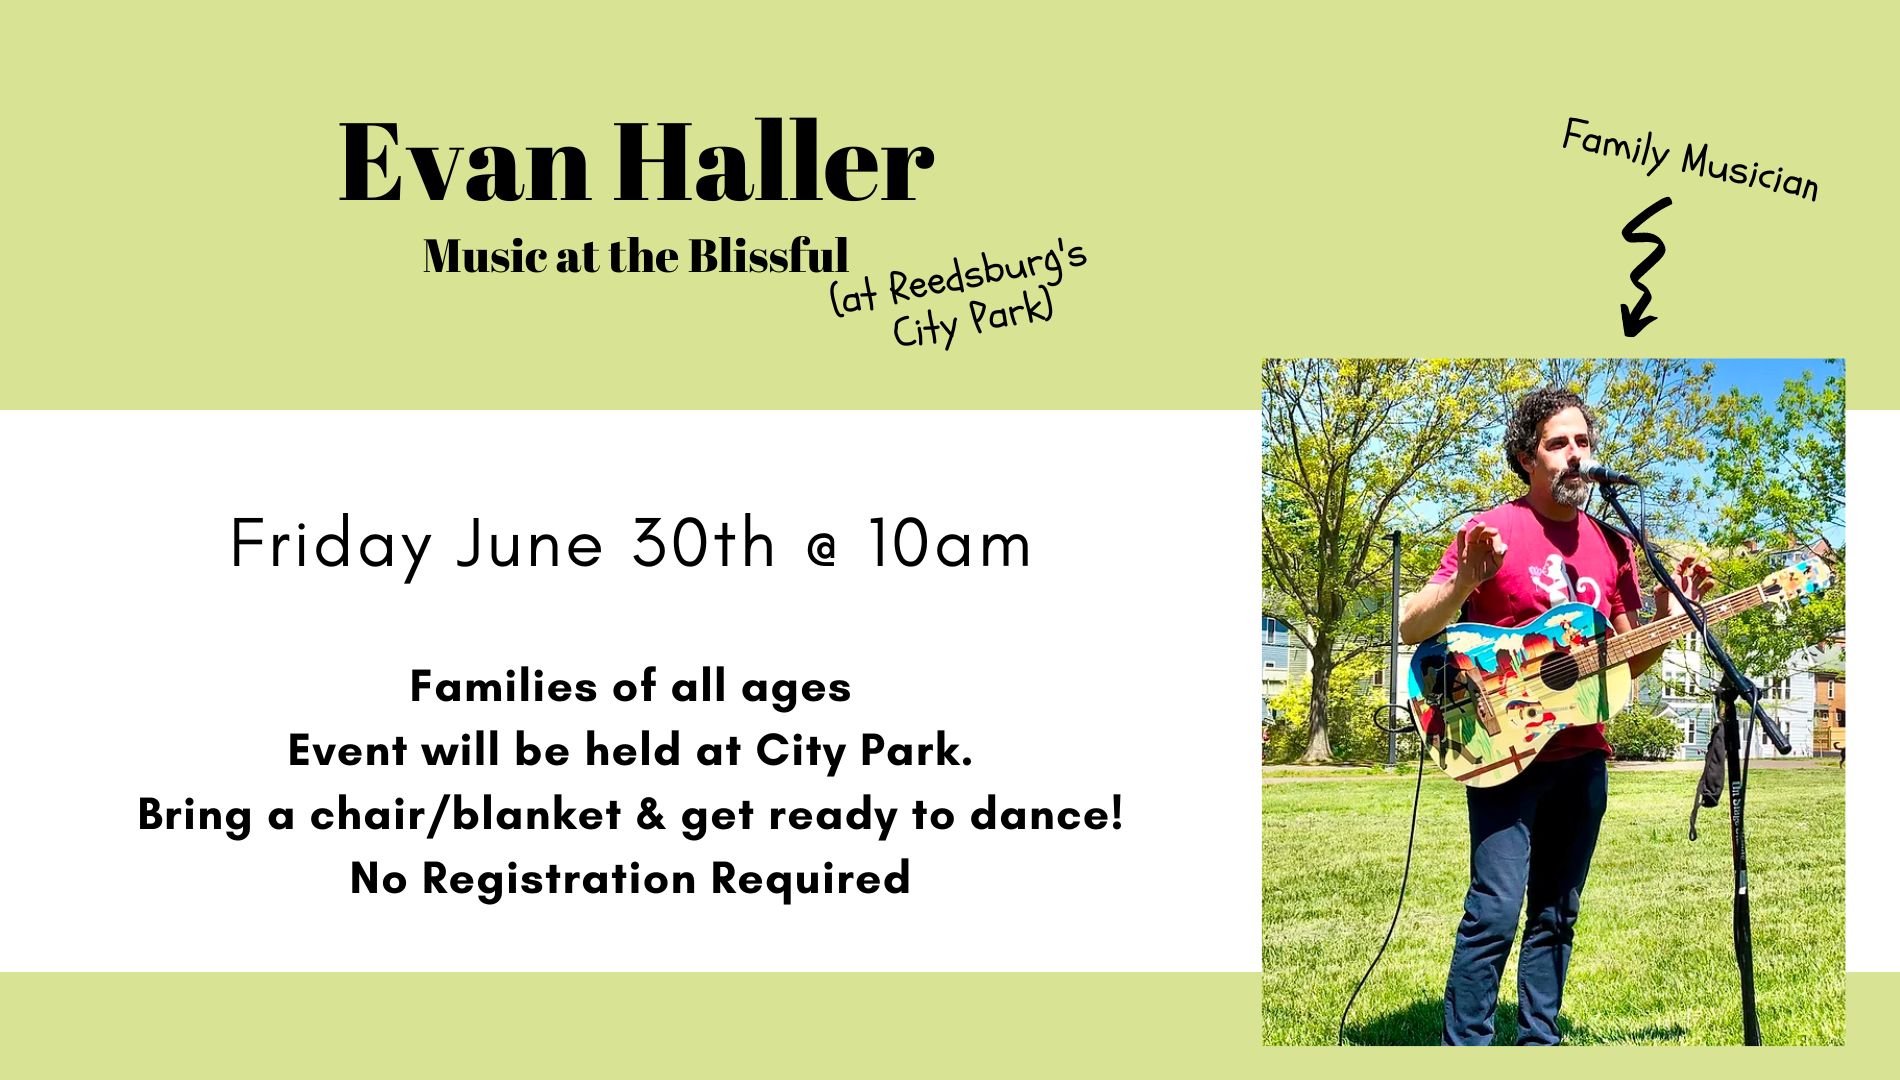 Evan Haller will be at City Park, weather permitting.